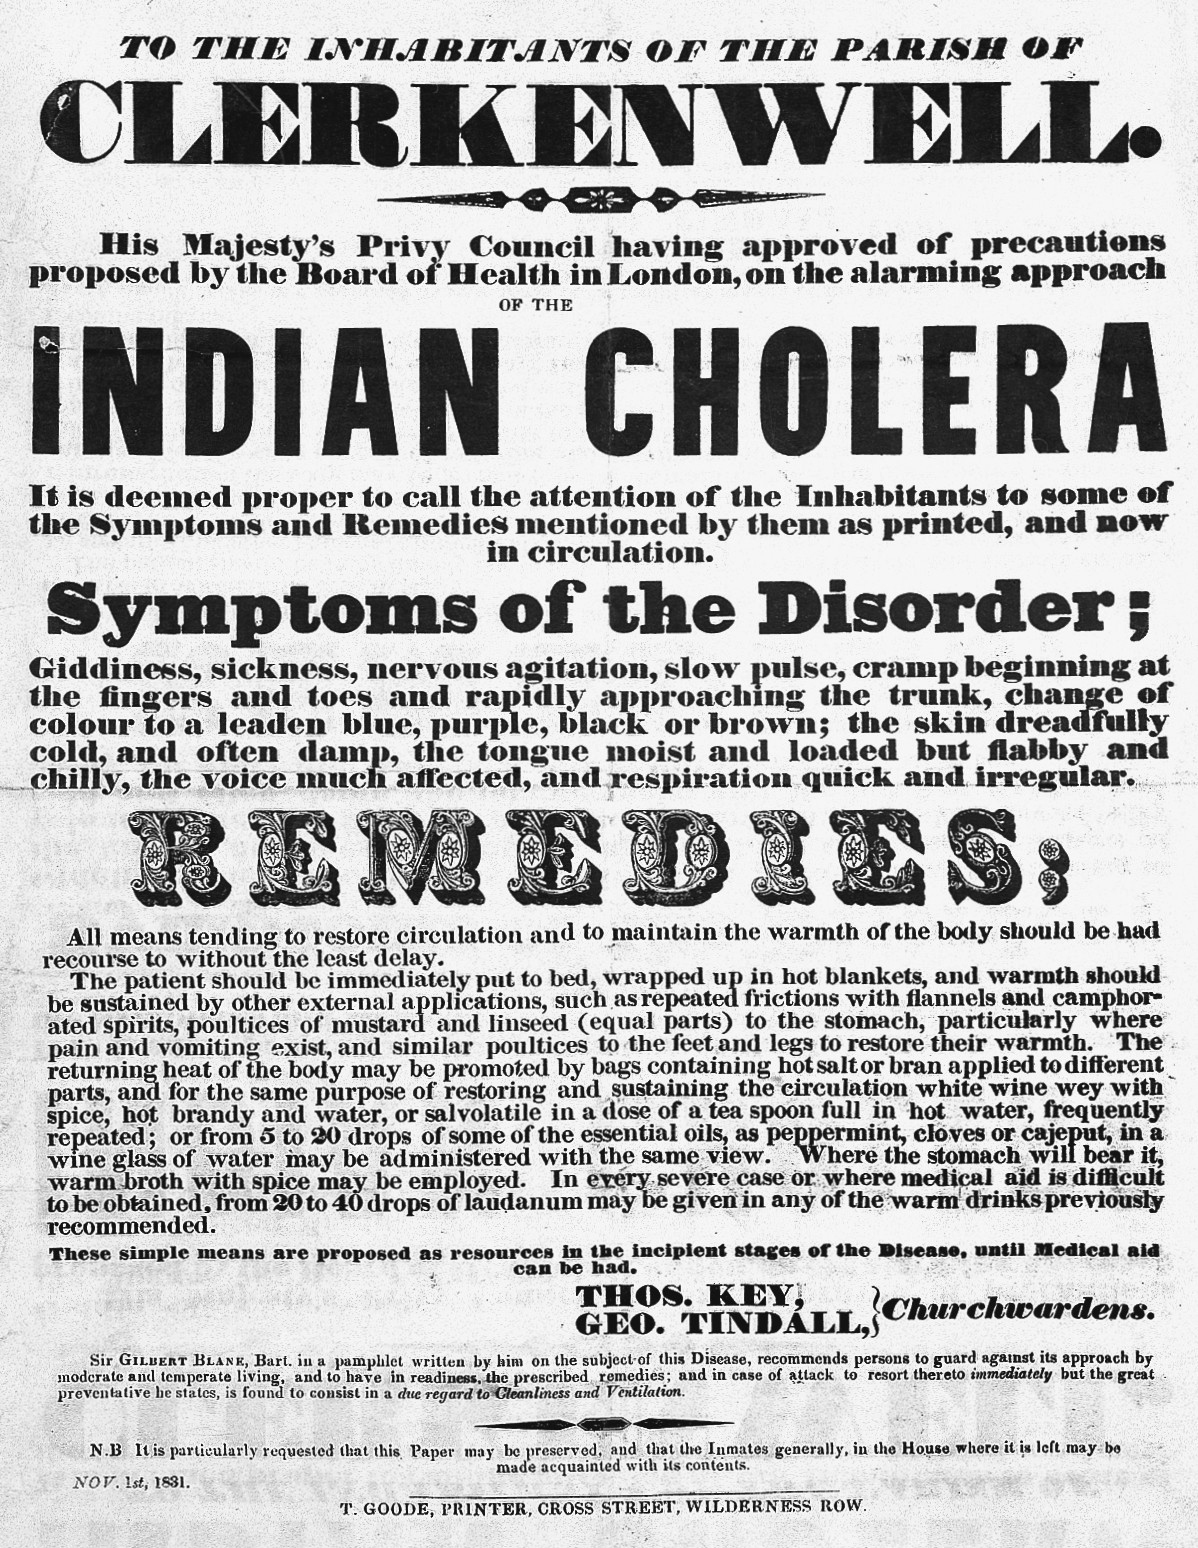 1831 poster warning of the “alarming approach” of “Indian” cholera